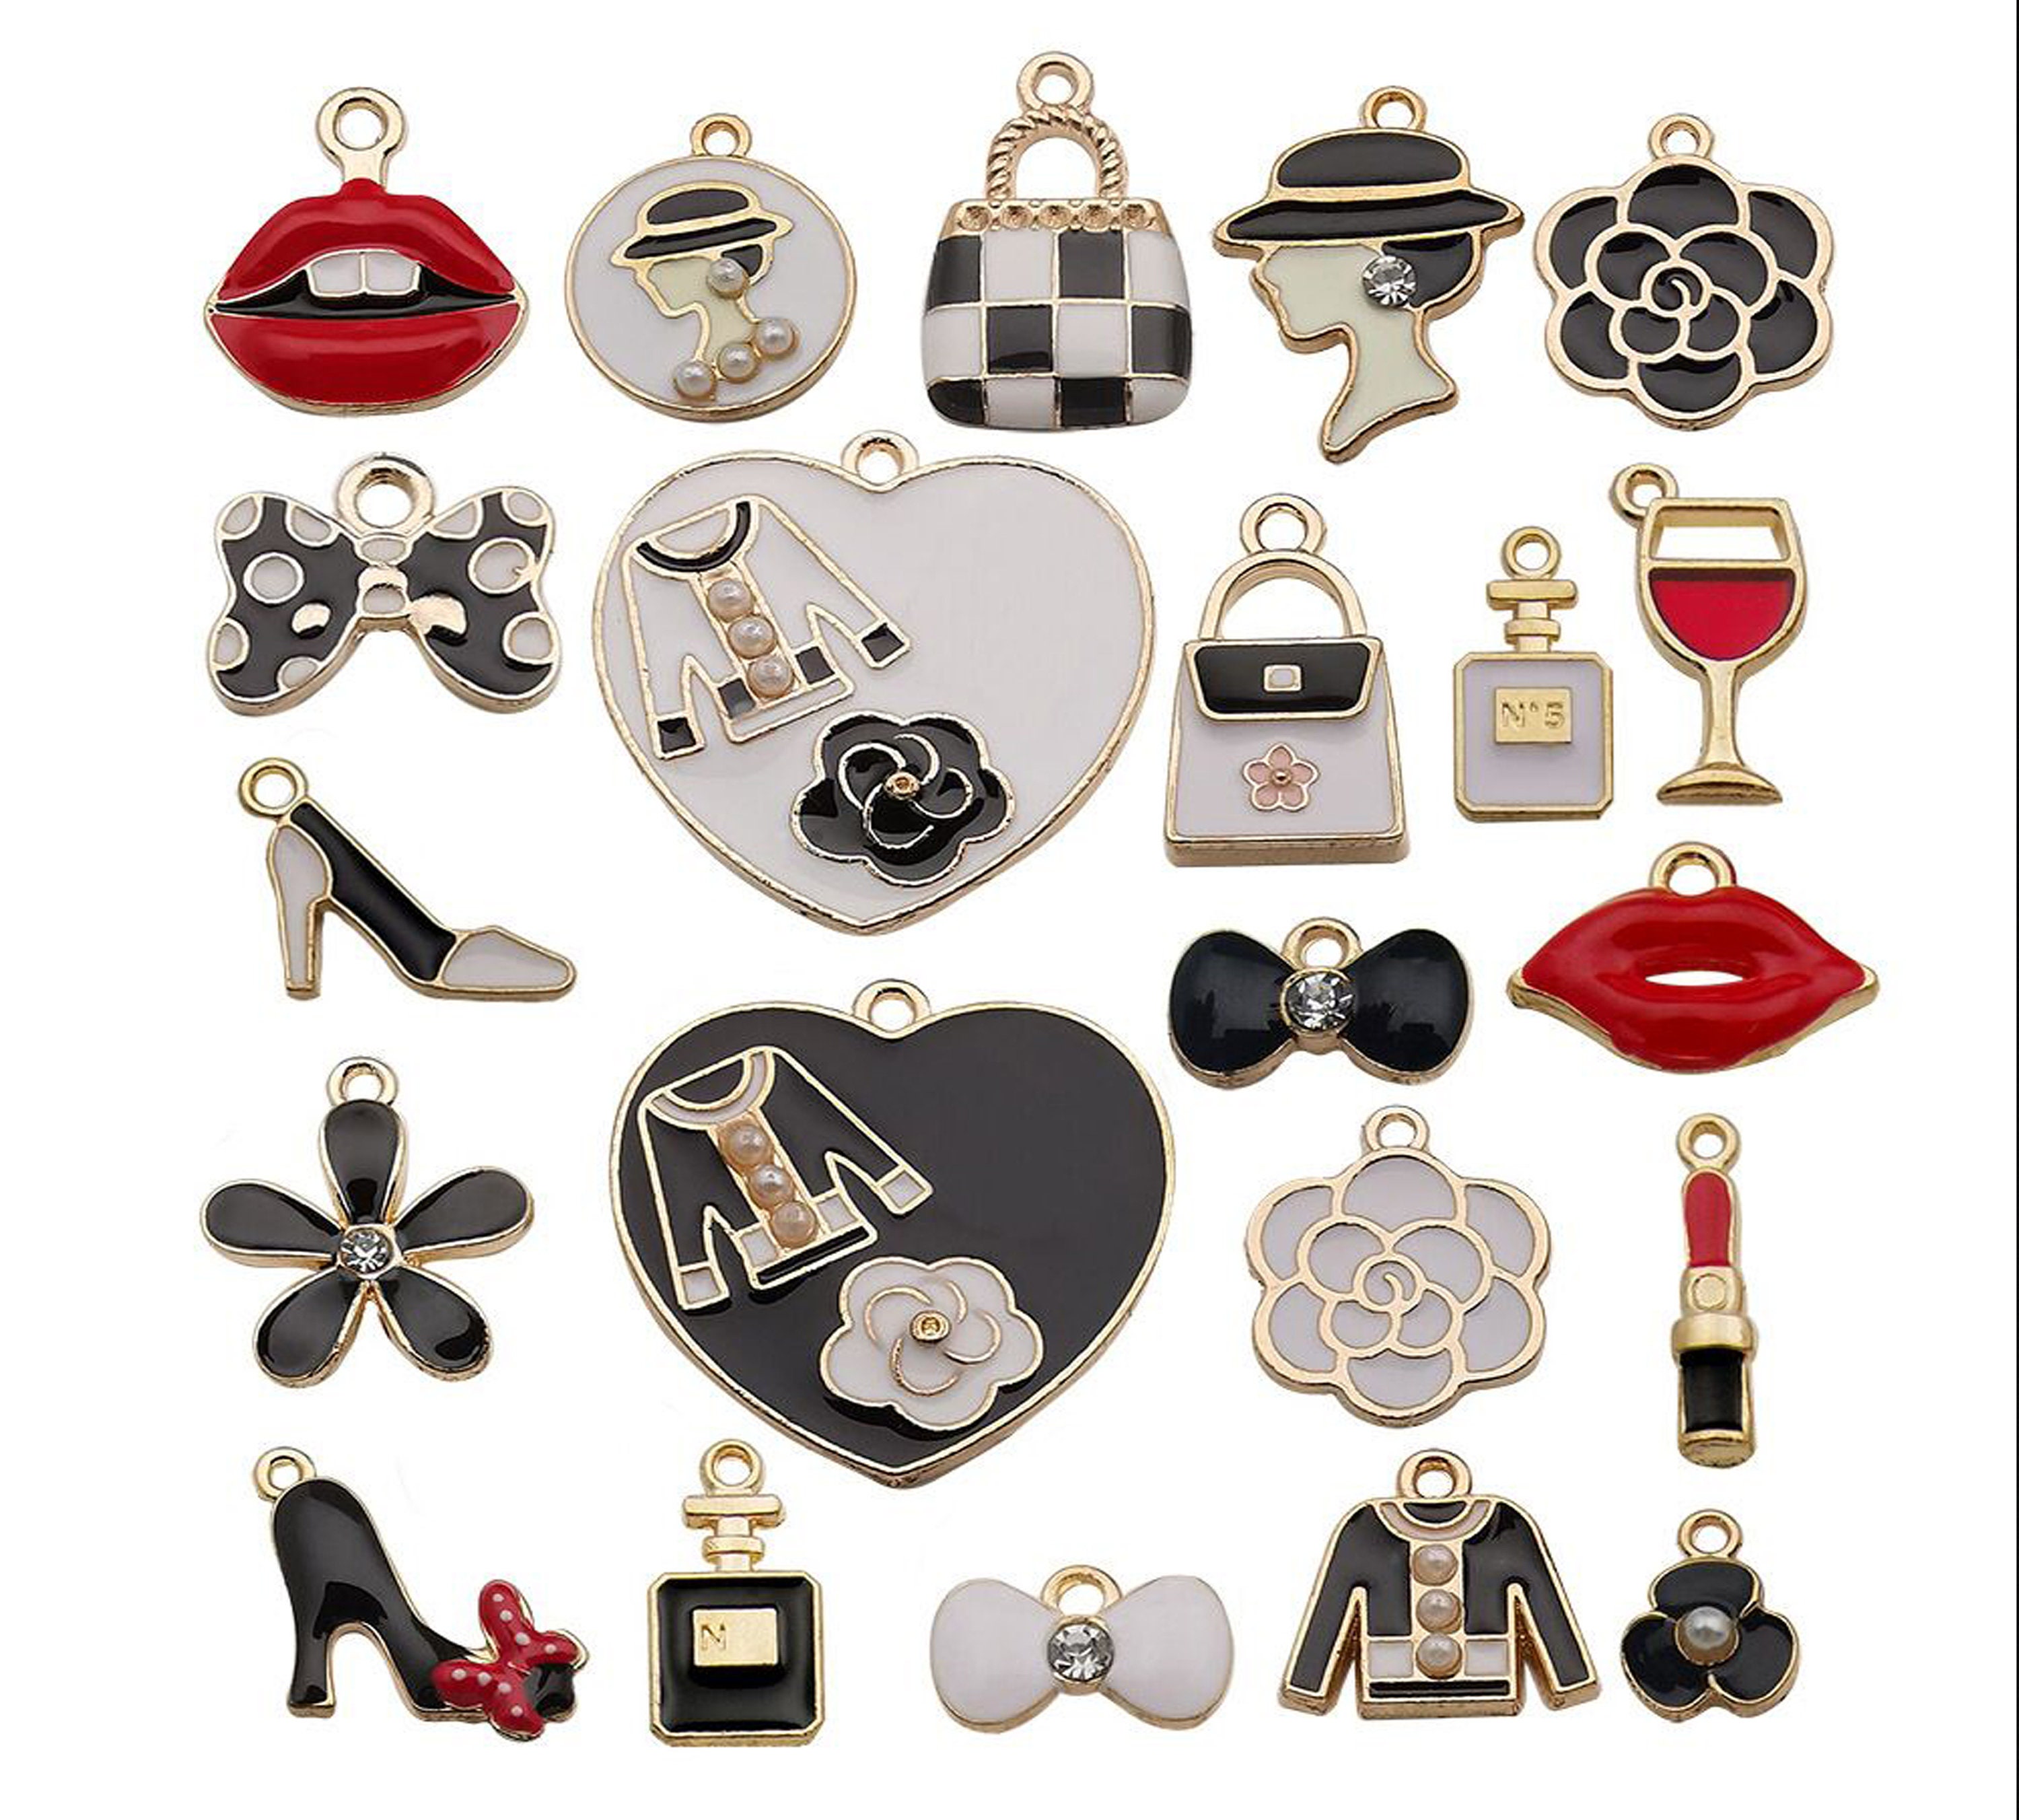 Bulk 100 Enamel Charms, Mixed Jewelry Charms, Gold Plated Metal Charm Pendant Collection, Assorted DIY Bracelet Charms